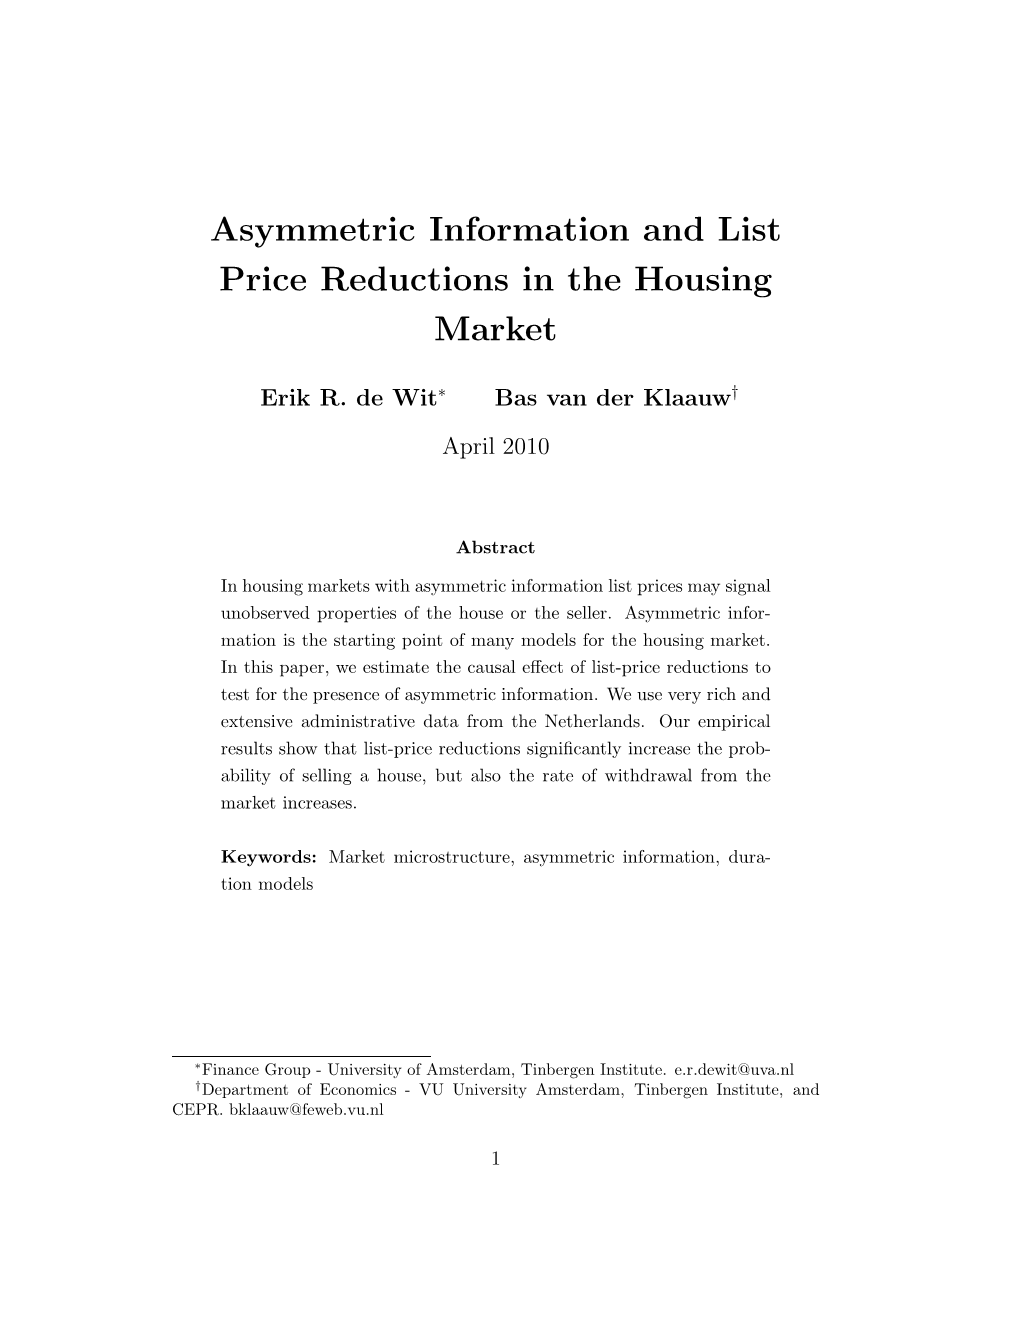 Asymmetric Information and List Price Reductions in the Housing Market